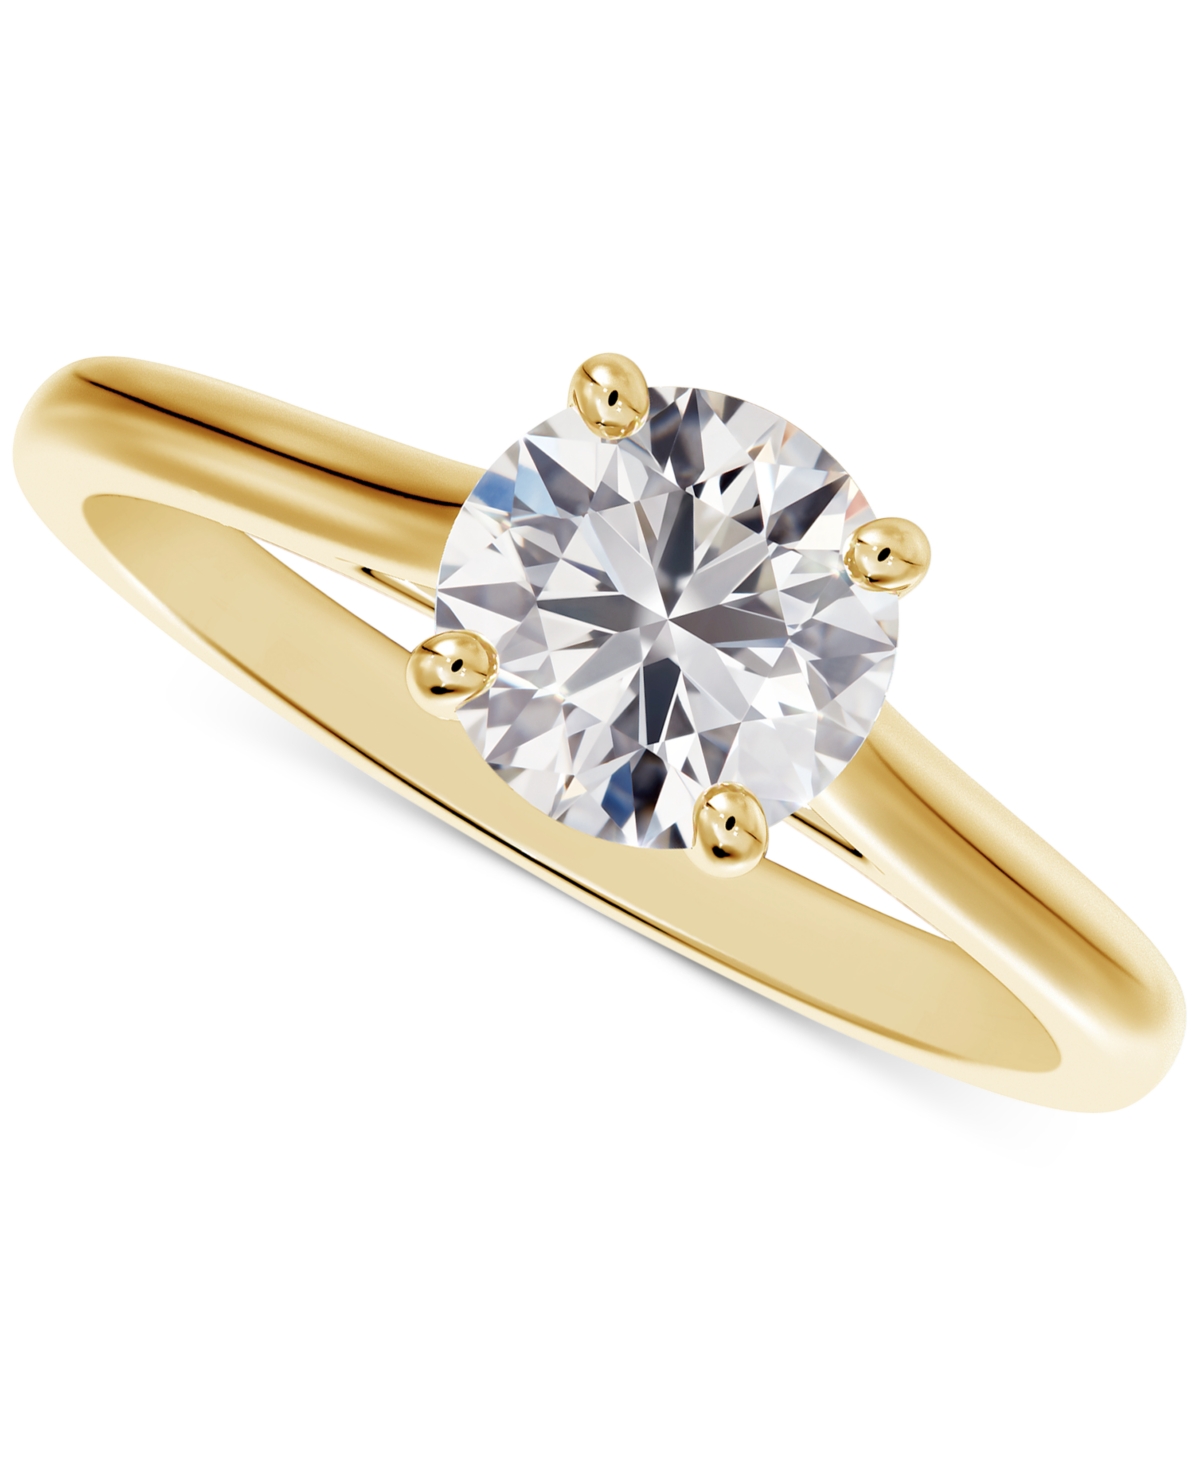 De Beers Forevermark Portfolio by De Beers Forevermark Diamond Round-Cut Cathedral Solitaire Engagement Ring (1/2 ct. t.w.)